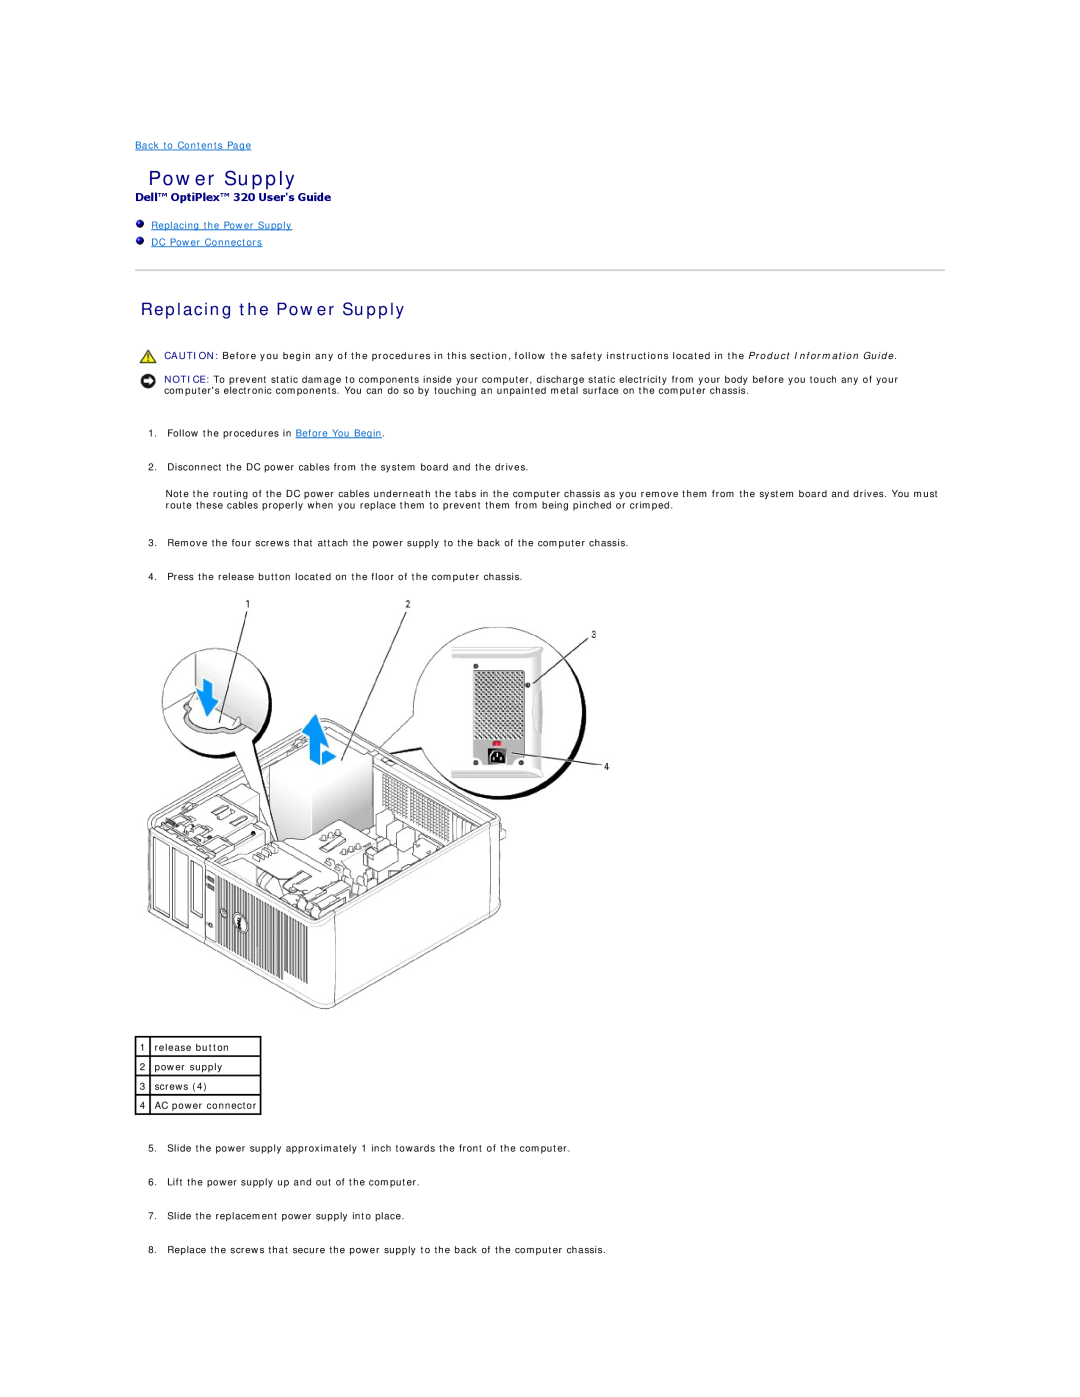 Dell manual Replacing the Power Supply, Dell OptiPlex 320 Users Guide, Back to Contents Page 